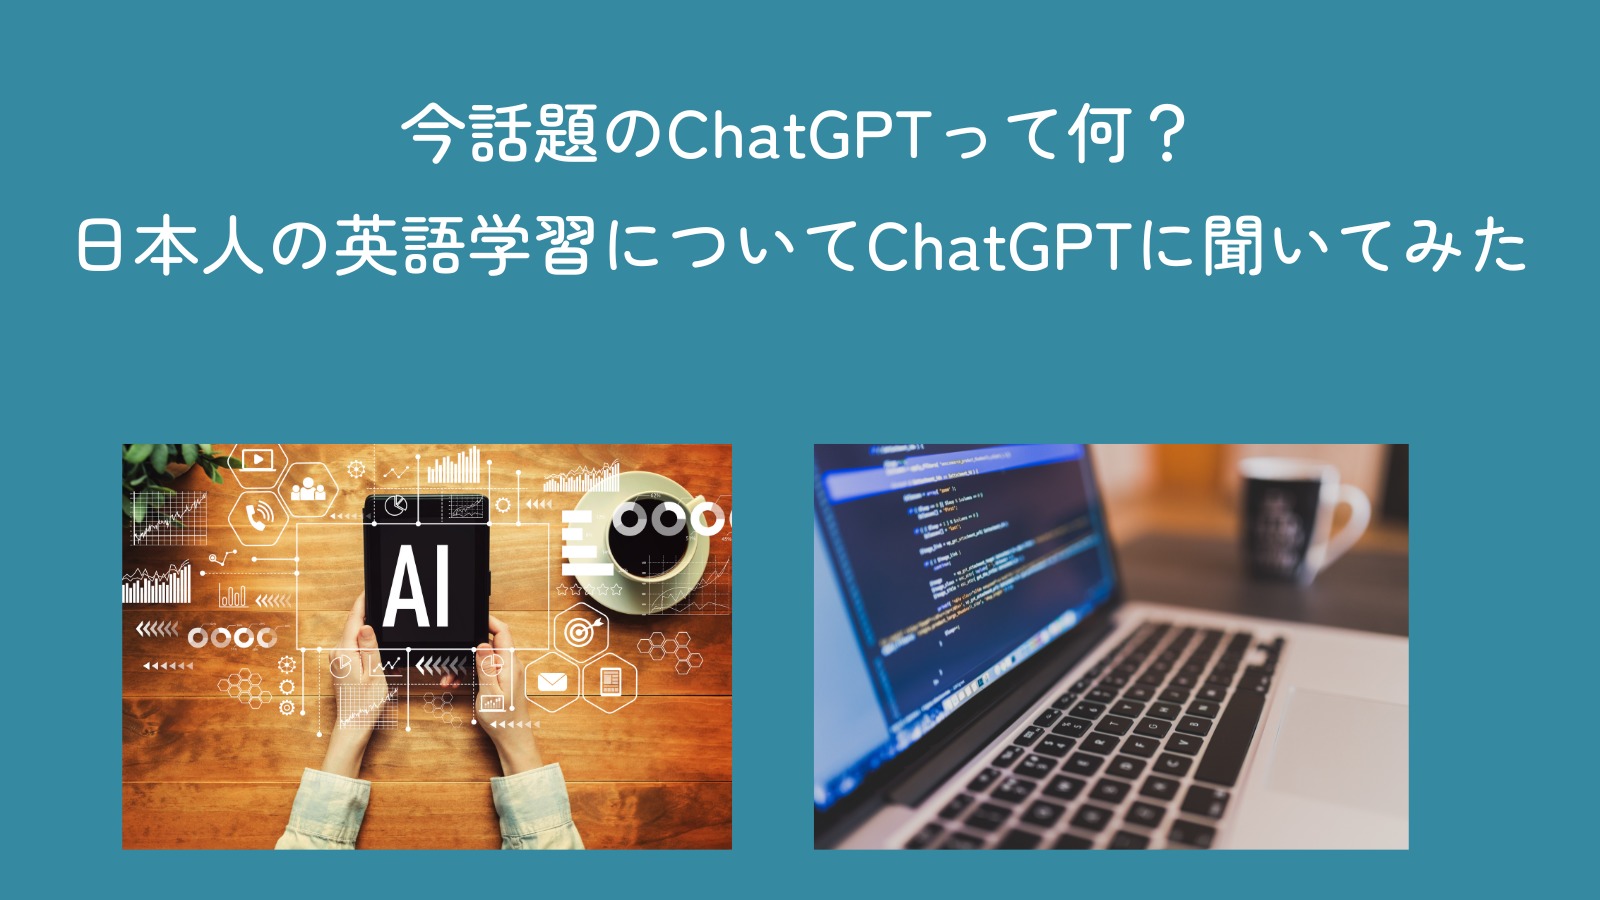 The title of this page that explain ChatGPT for Japanese English learners